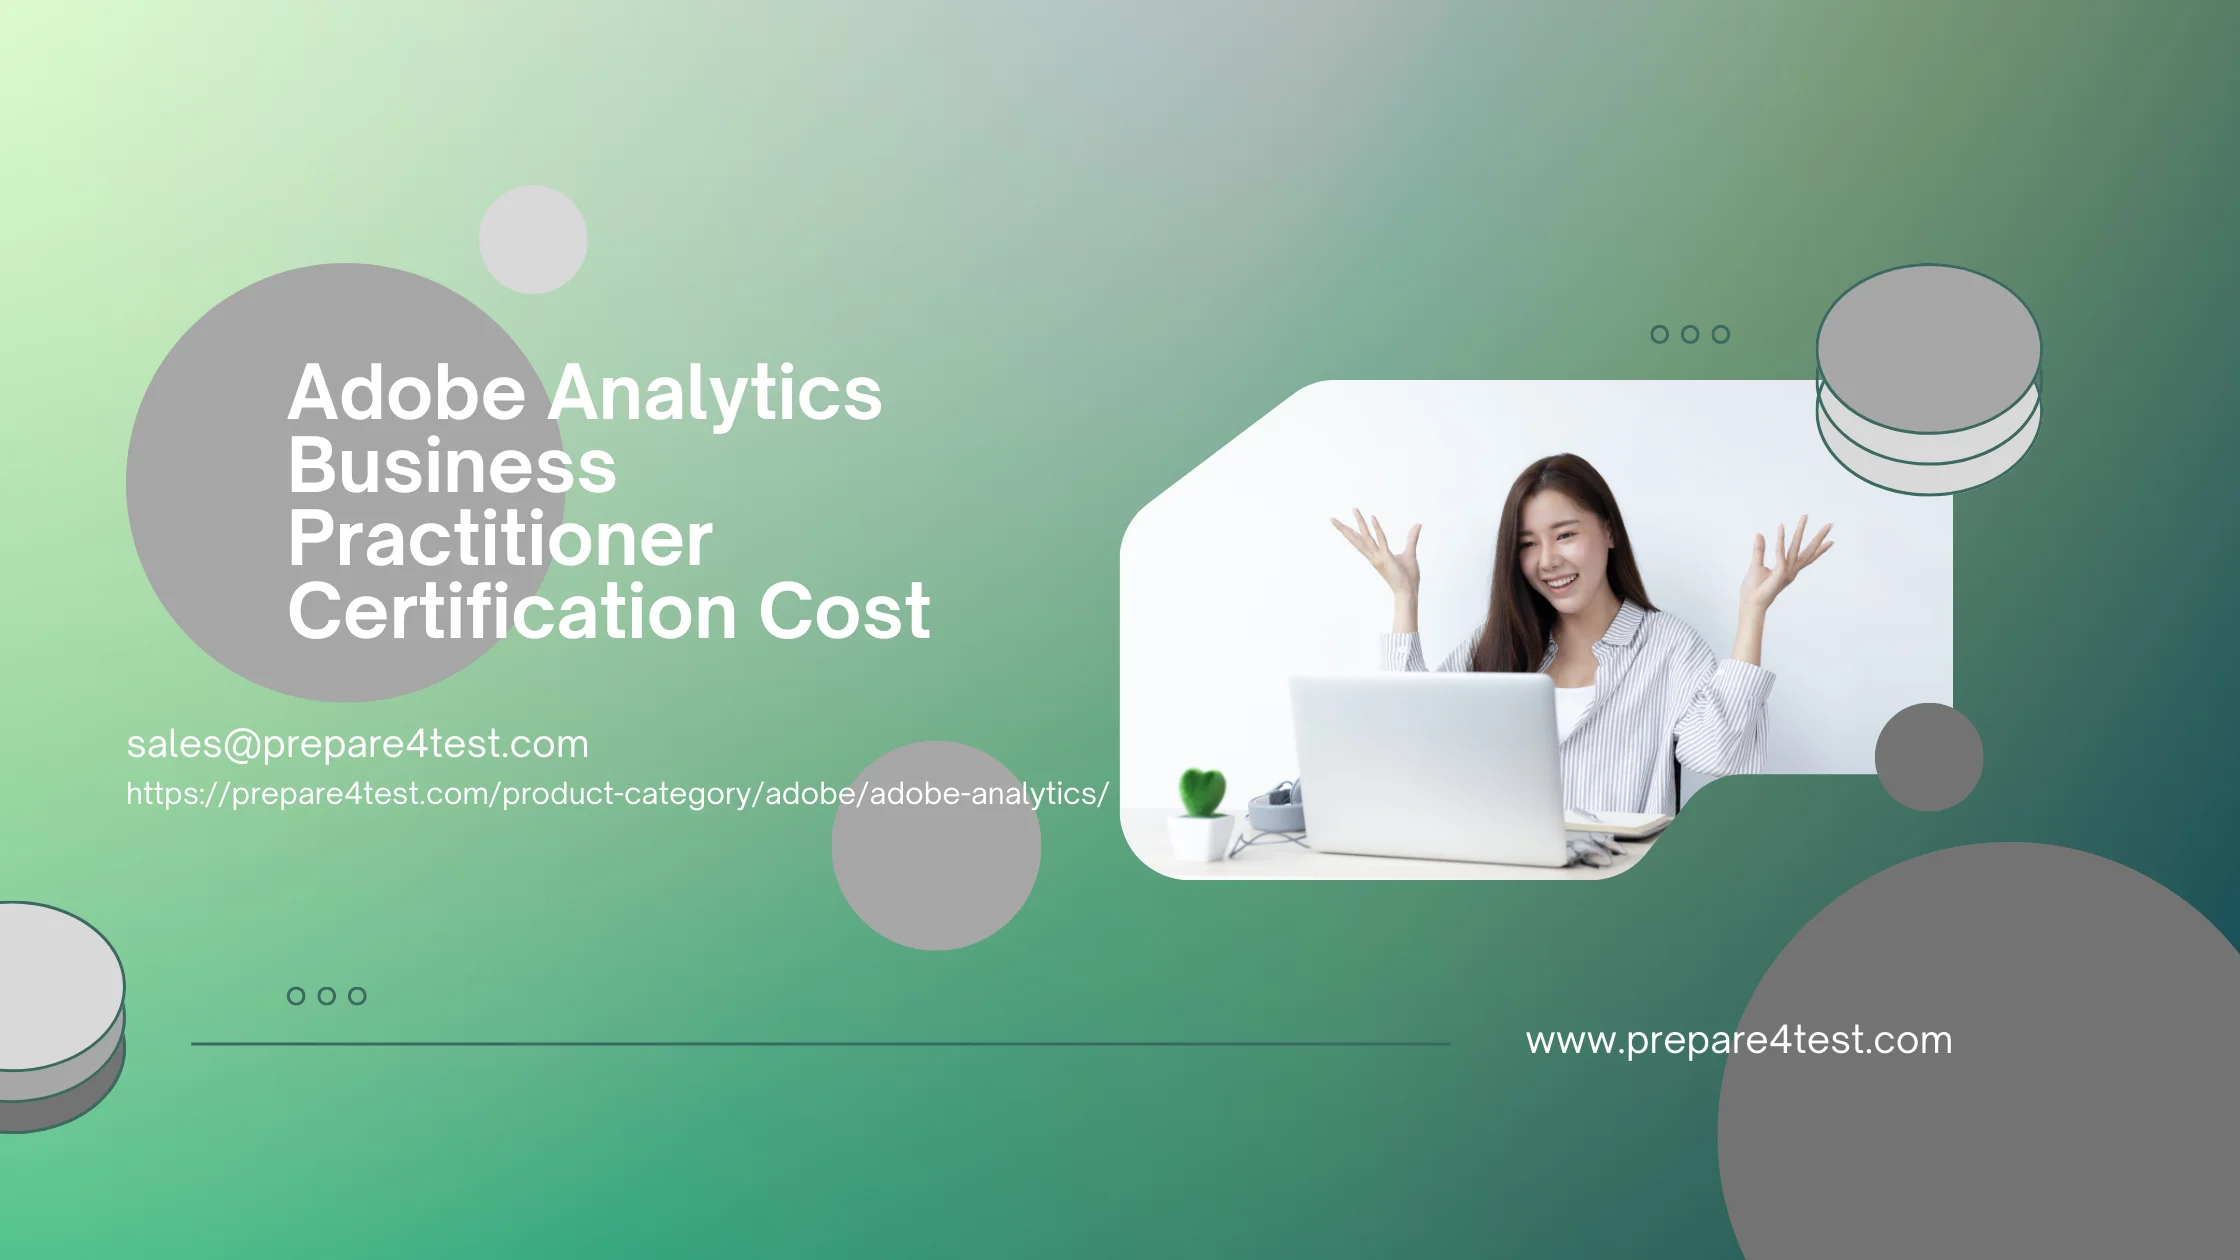 Adobe Analytics Business Practitioner Certification Cost promo